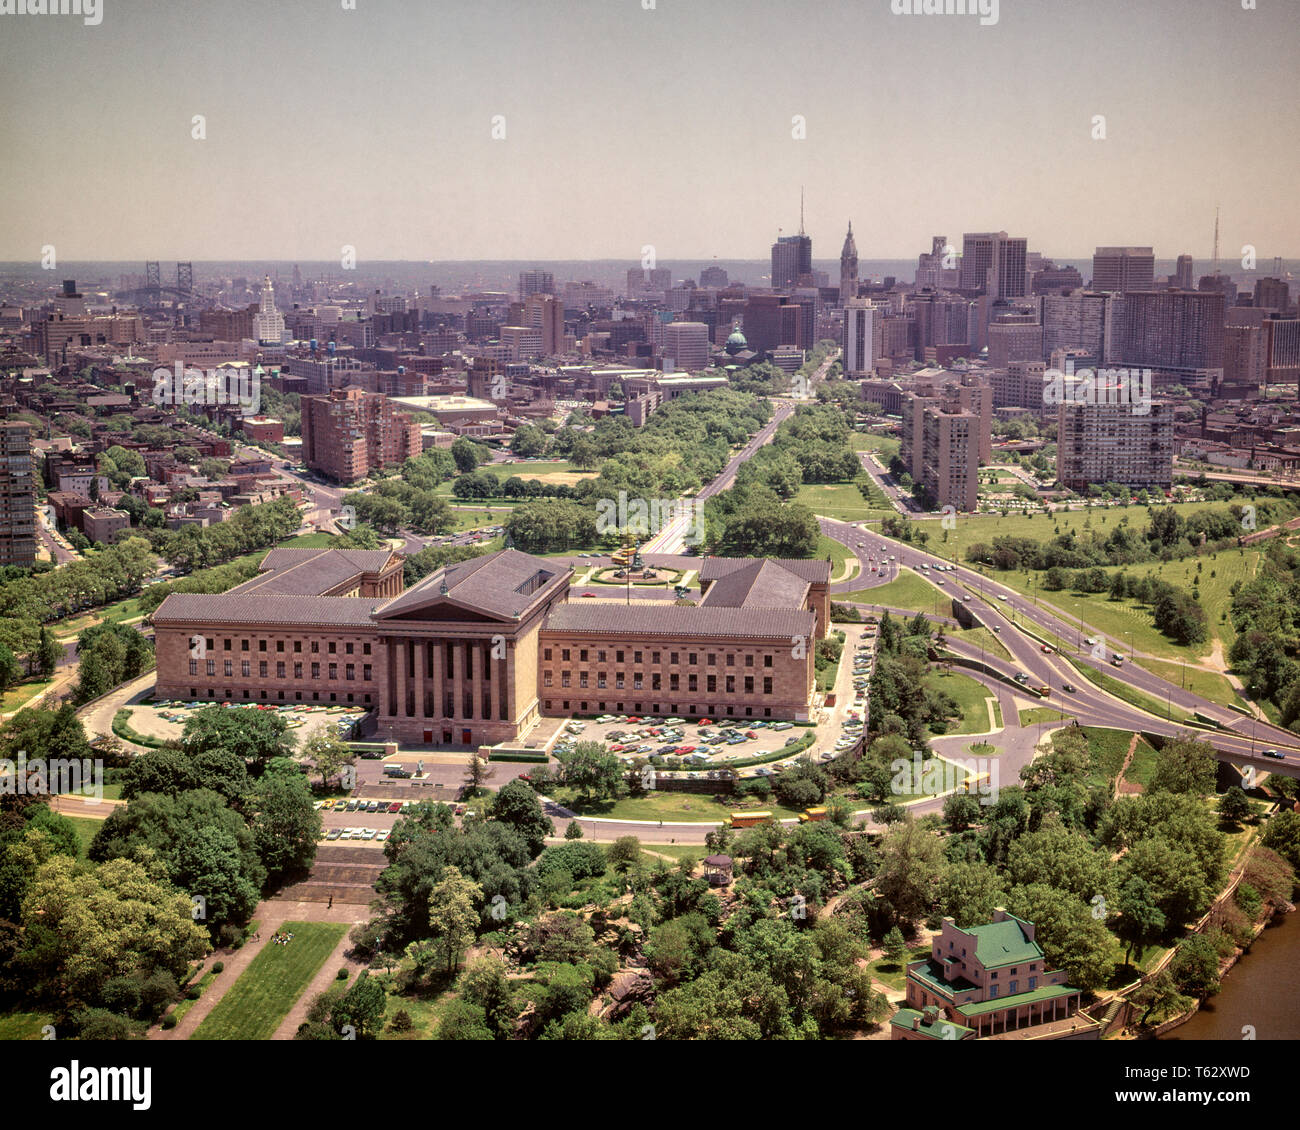 1970s AERIAL VIEW OF PHILADELPHIA MUSEUM OF ART BENJAMIN FRANKLIN PARKWAY AND CENTER CITY SKYLINE PENNSYLVANIA USA - kp2038 HAR001 HARS ART MUSEUM BROTHERLY LOVE HAR001 OLD FASHIONED WILLIAM PENN Stock Photo